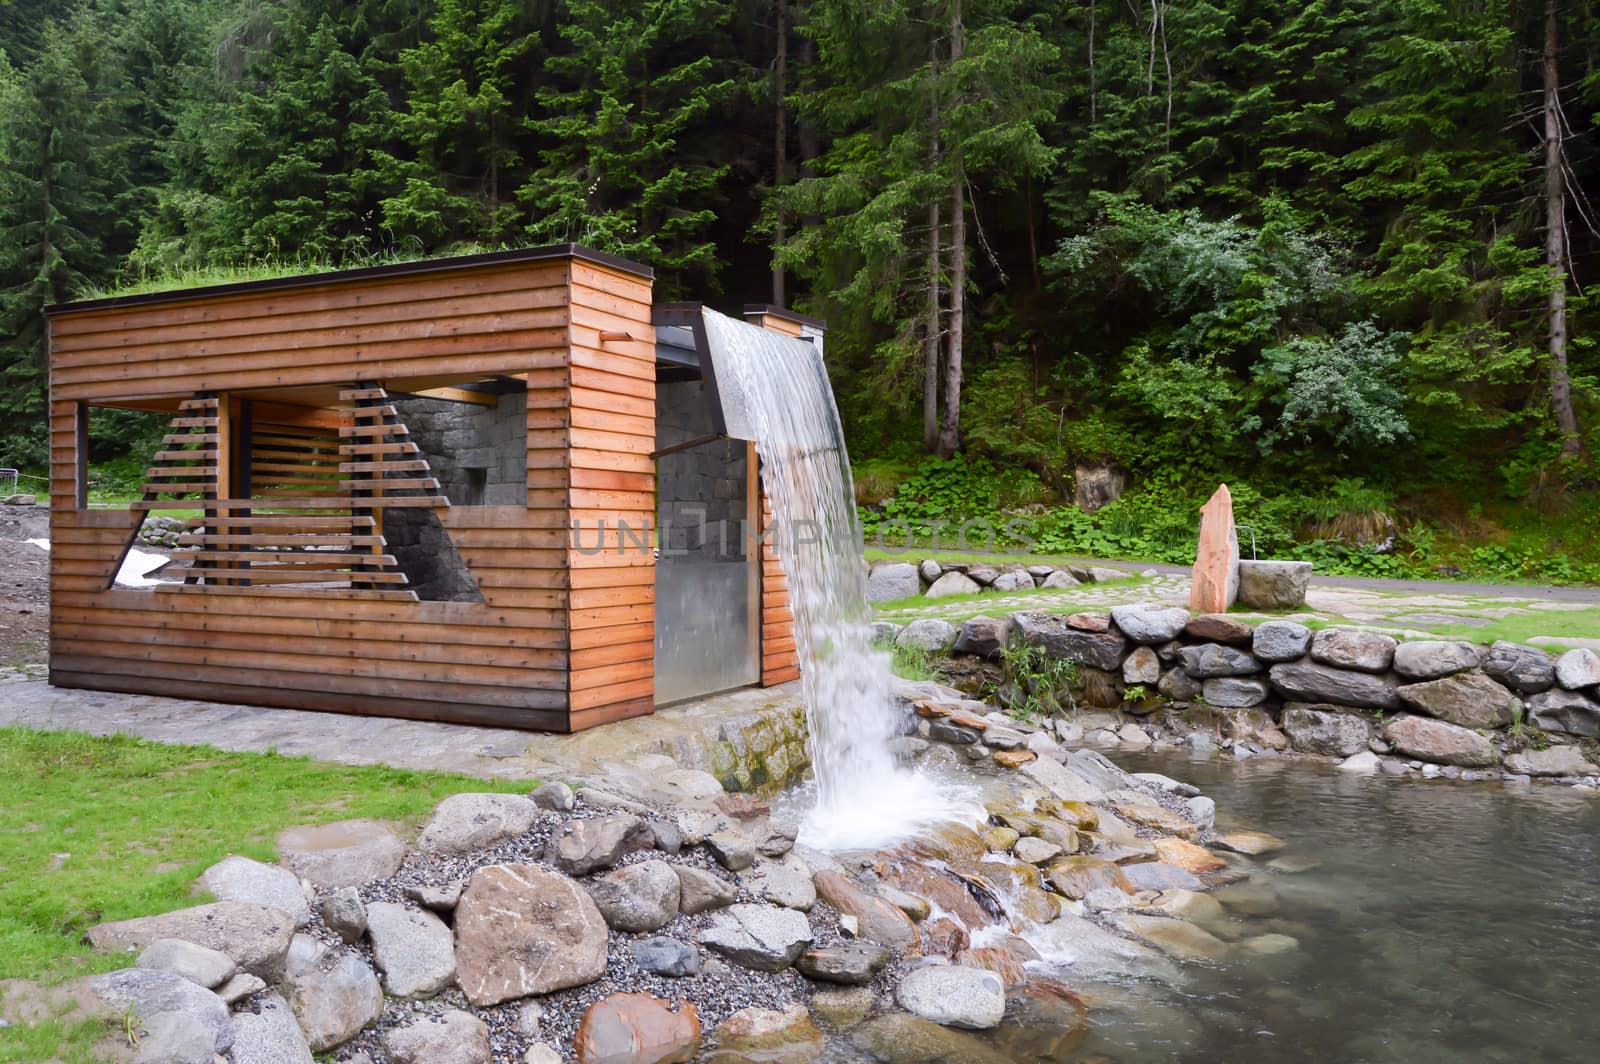 Artificial waterfall on a small wooden hut in a natural park in the dolomites in Italy